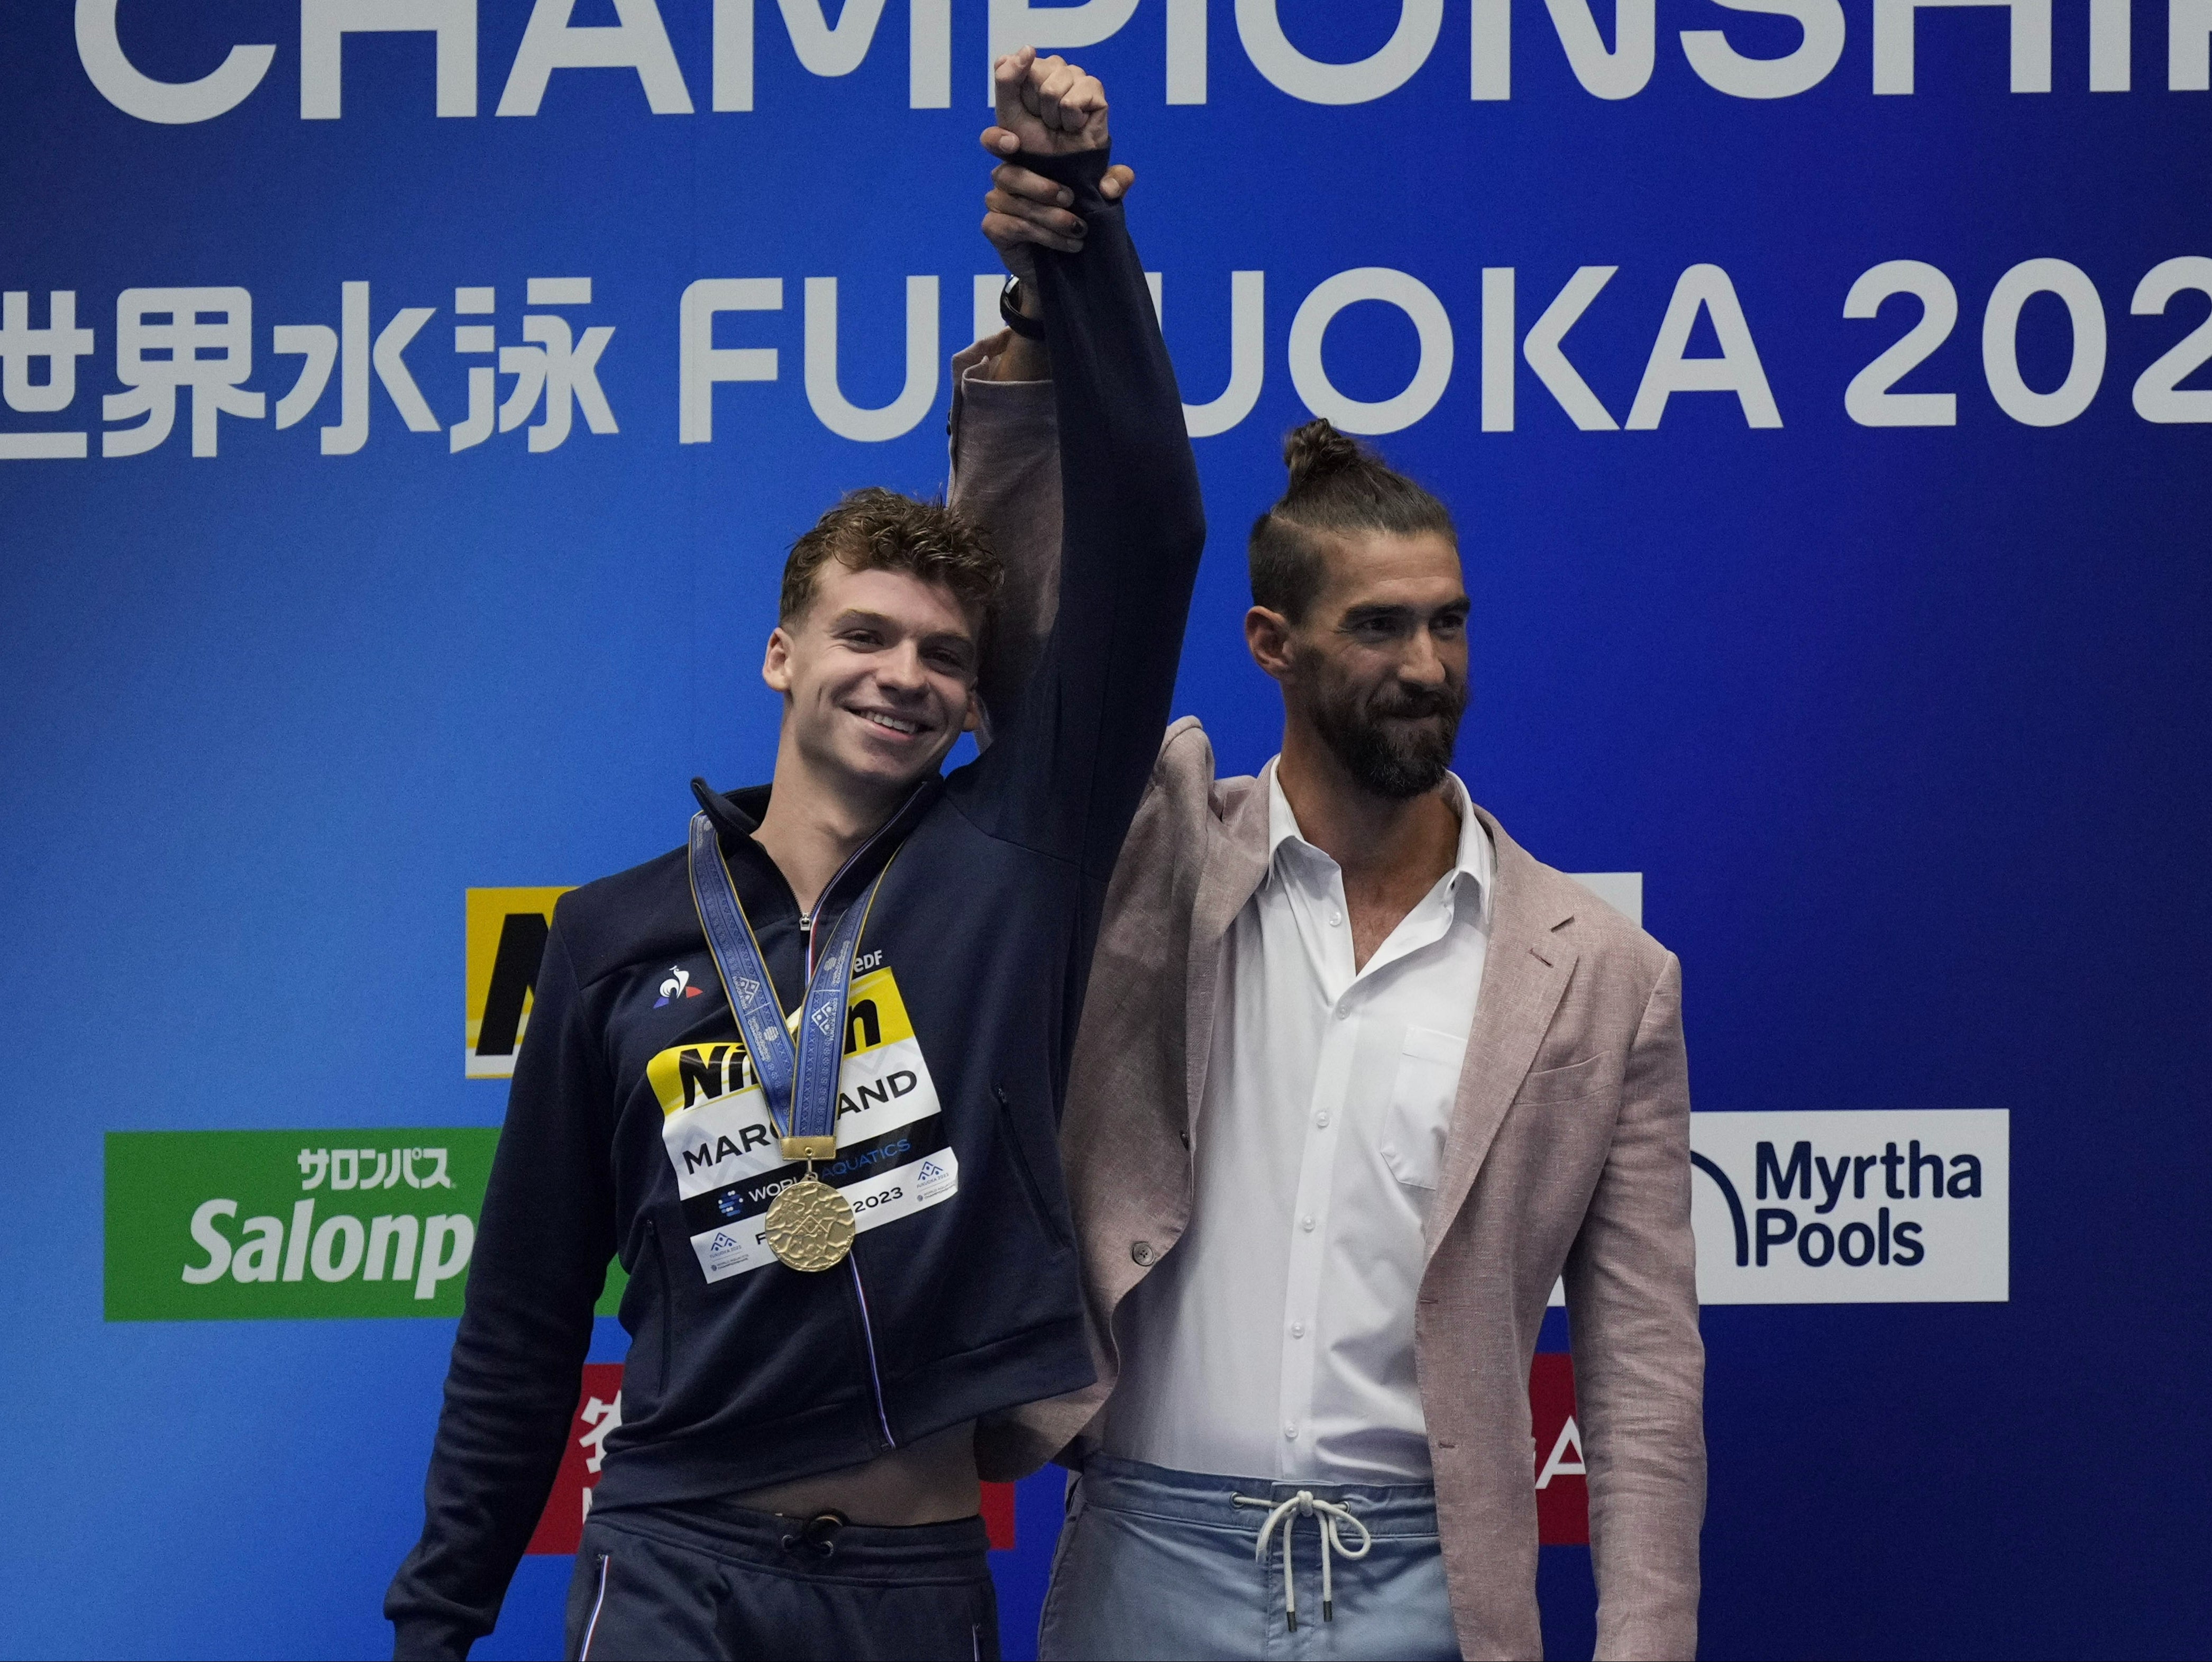 Michael Phelps presented Leon Marchand with his gold medal